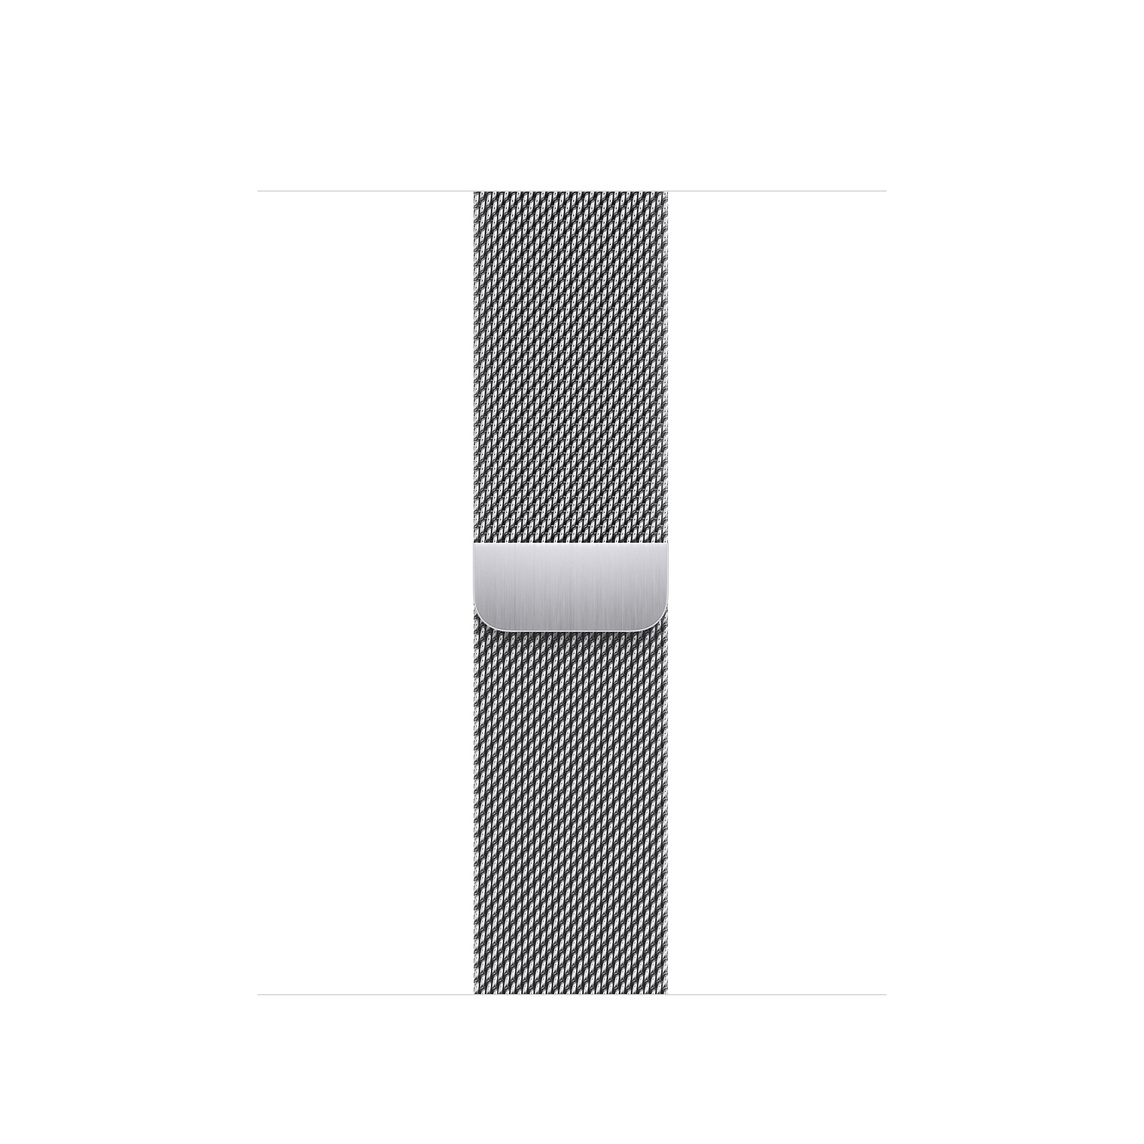 Silver Milanese Loop band, polished stainless steel mesh with magnetic closure